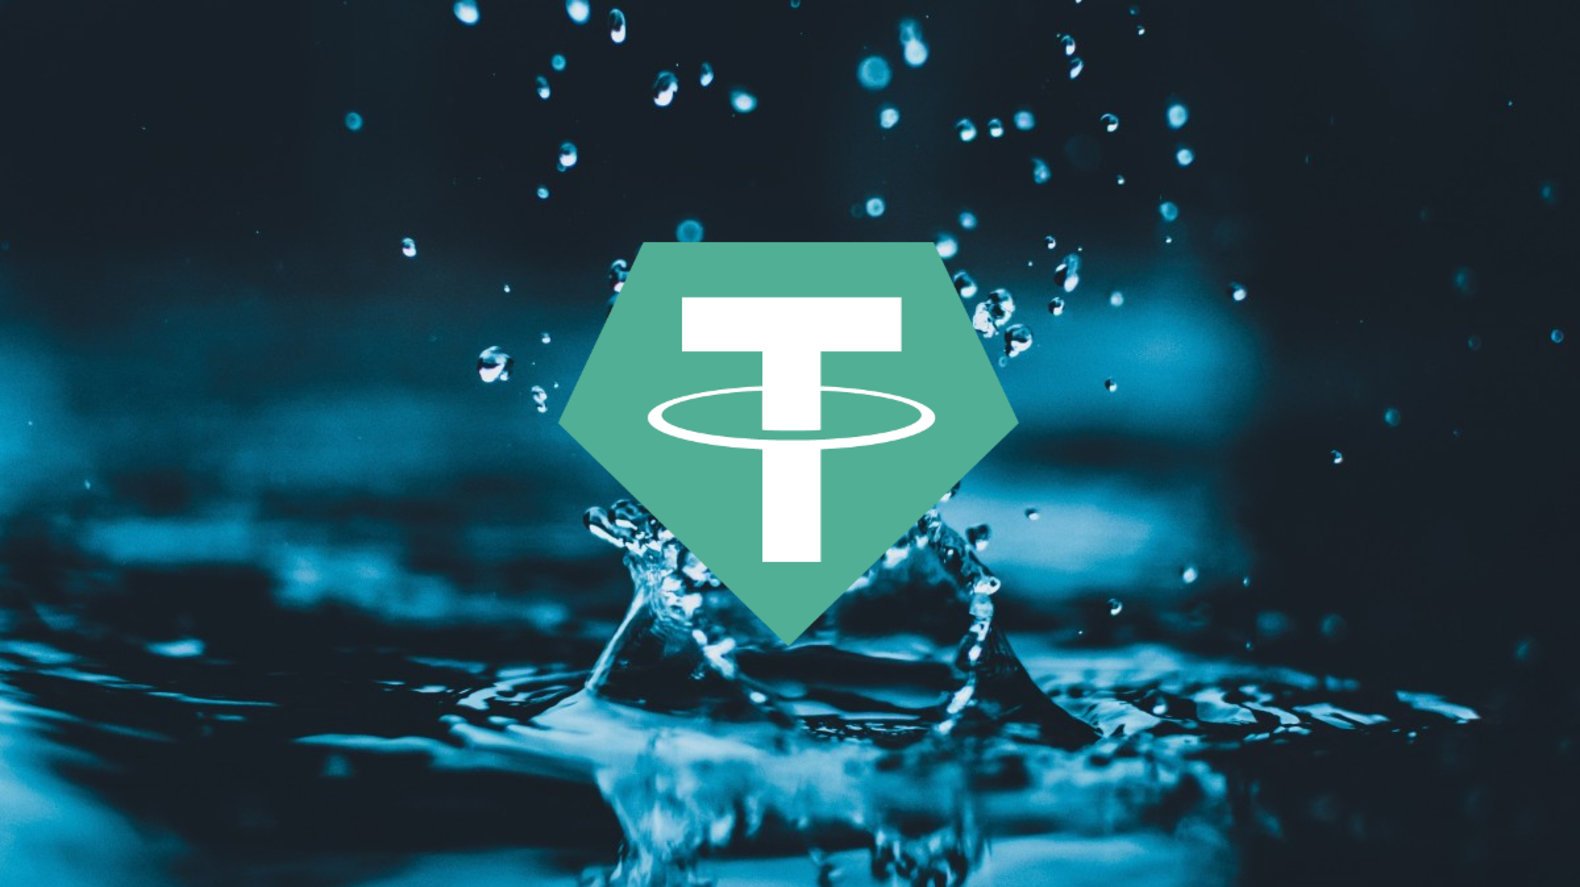 Tether (USDT) stablecoin image cover